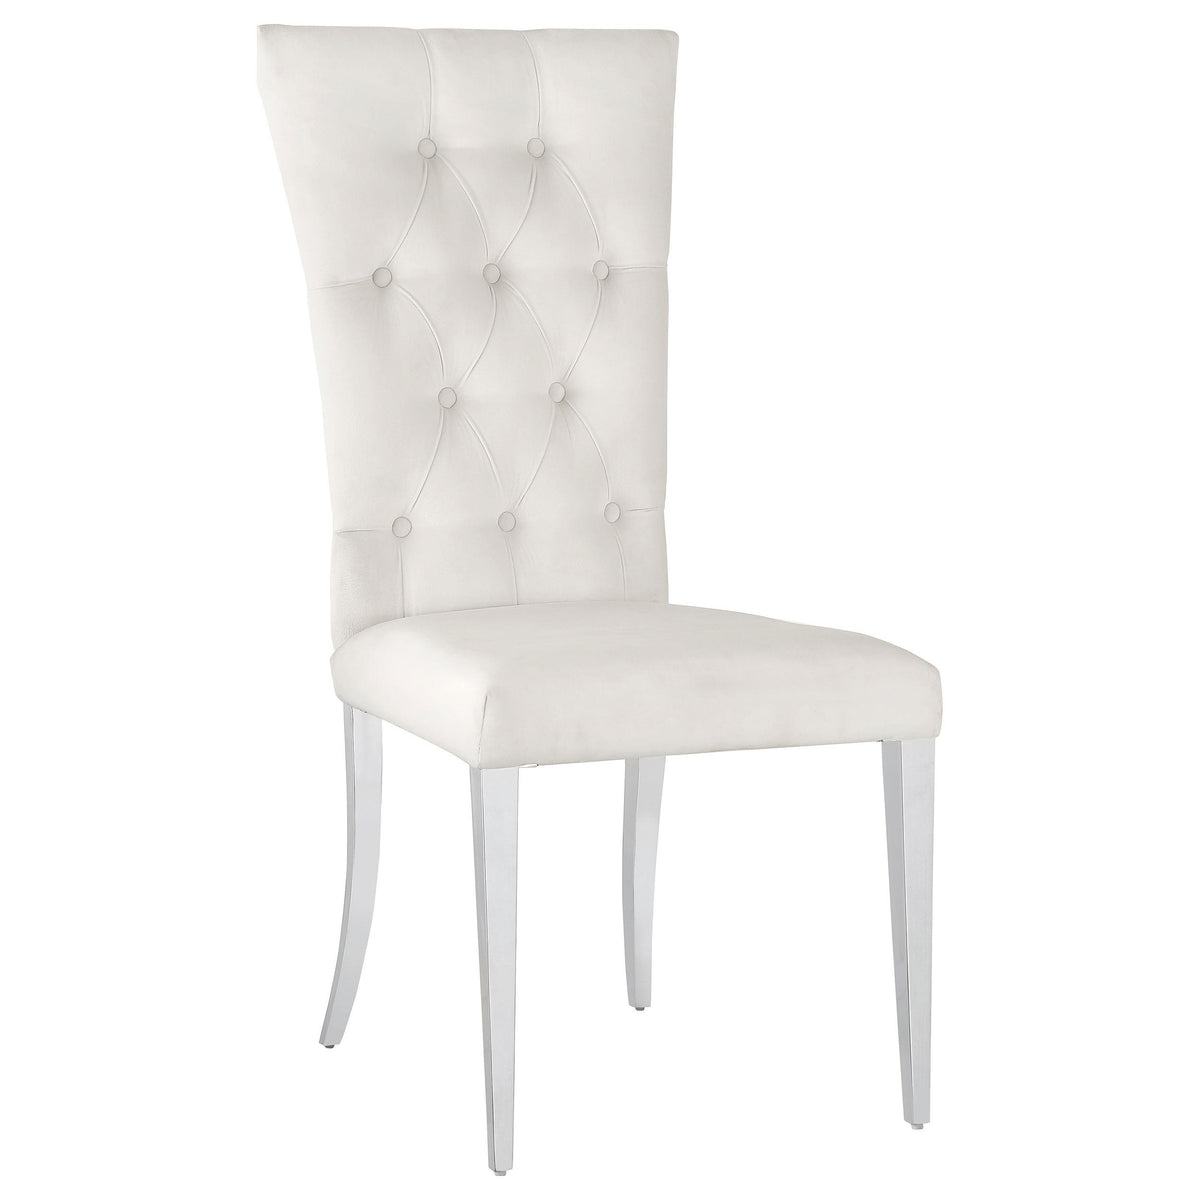 Kerwin Tufted Upholstered Side Chair (Set Of 2) Kerwin Tufted Upholstered Side Chair (Set Of 2) Half Price Furniture